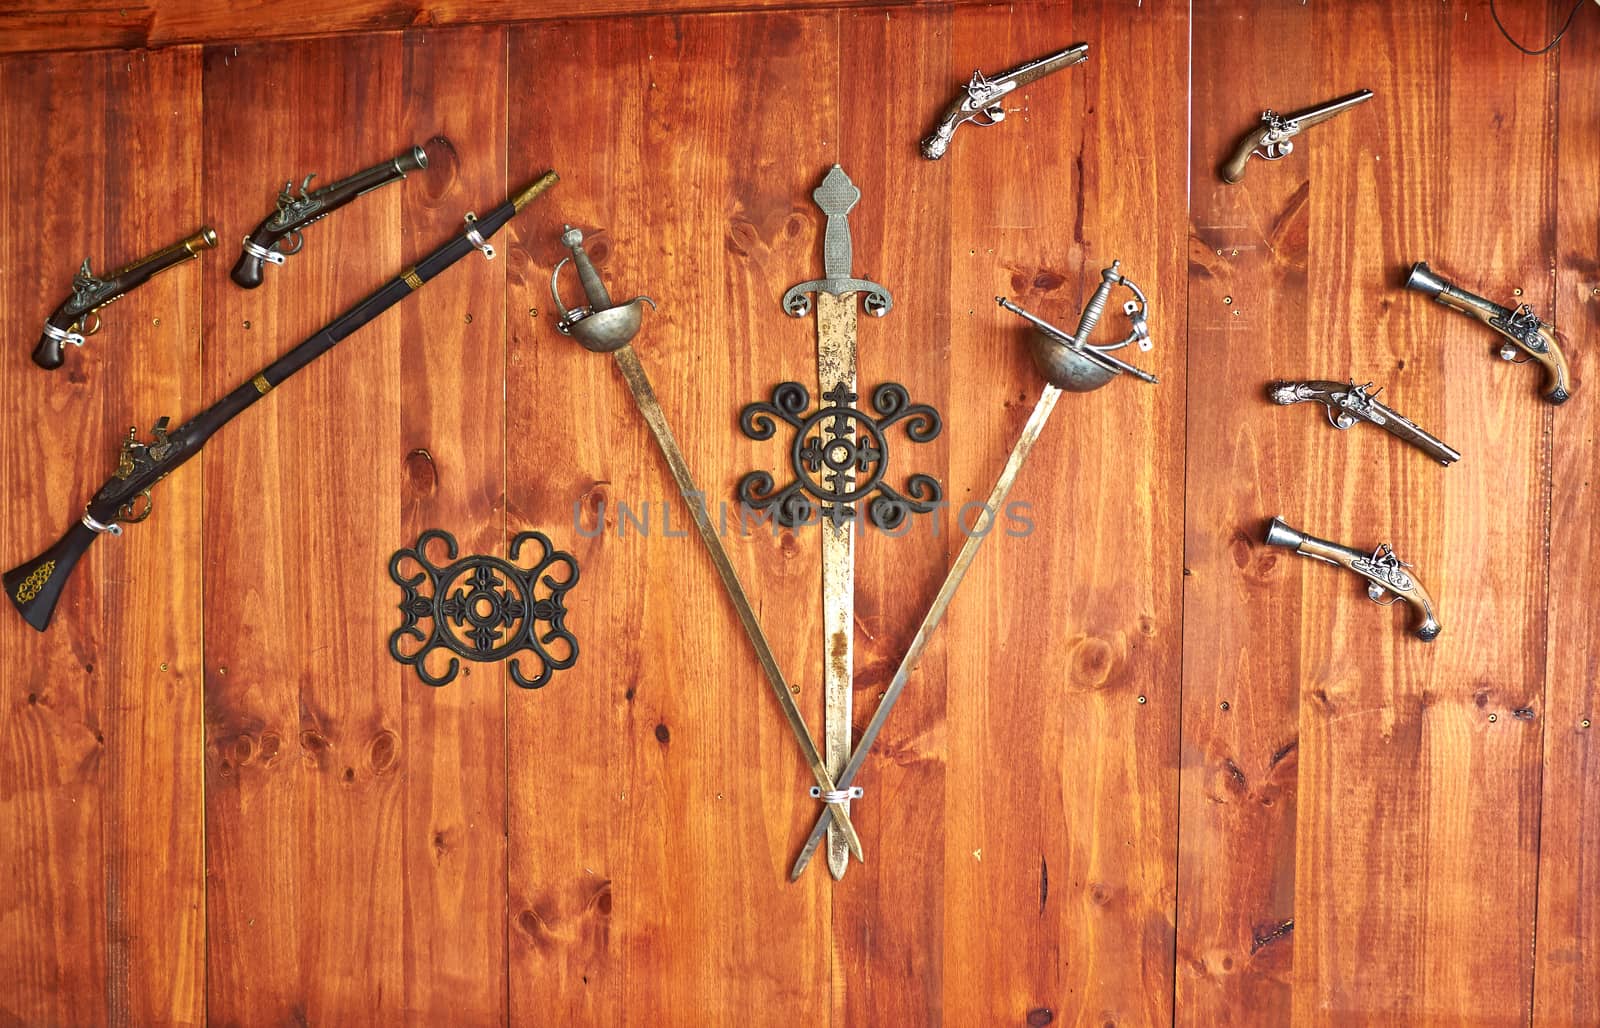 Collection of old antique historical traditional Spanish weapons on display